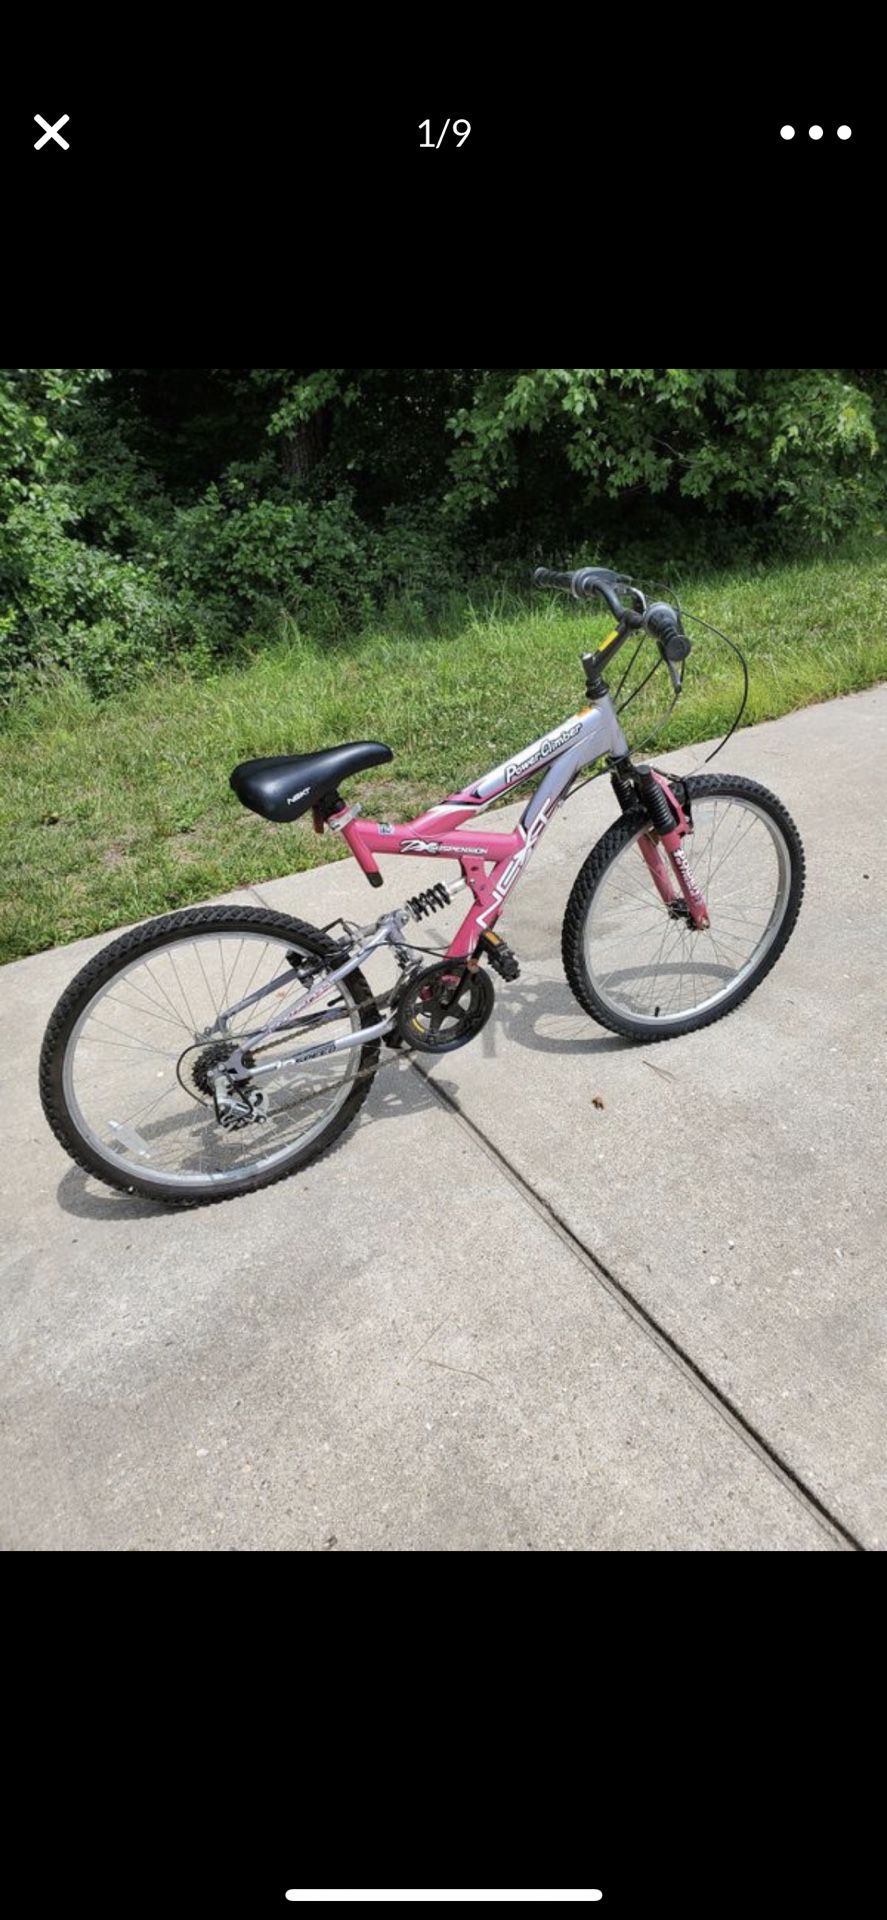 Girls Bicycle for sale: Good condition and excellent performance